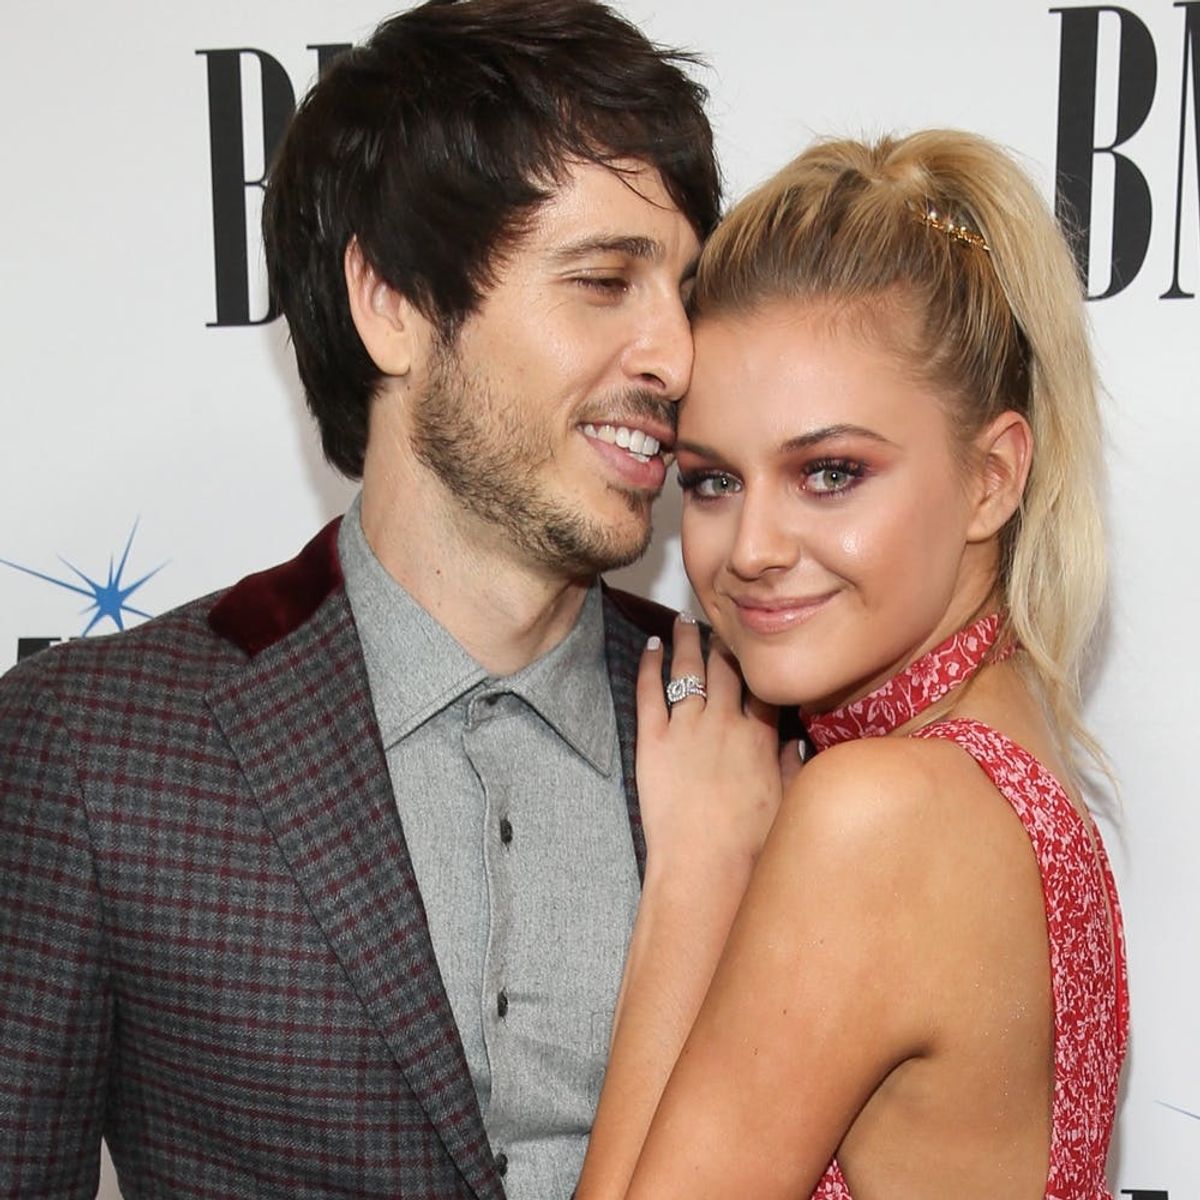 See the Gorgeous Wedding Gown Country Darling Kelsea Ballerini Just Walked Down the Aisle In